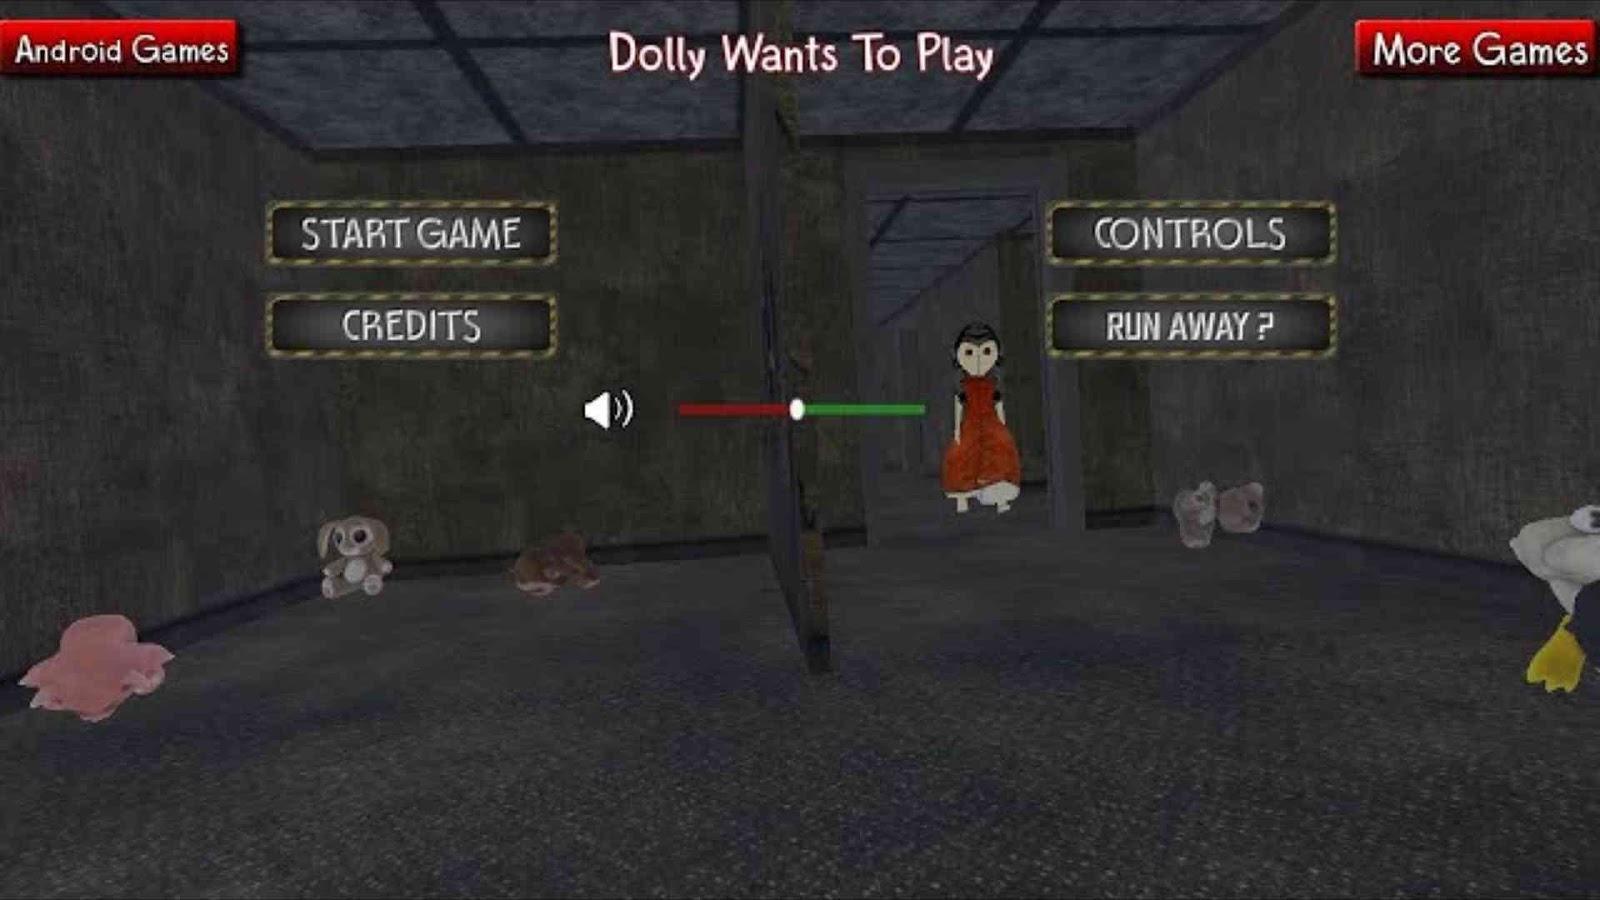 Dolly Wants to Play